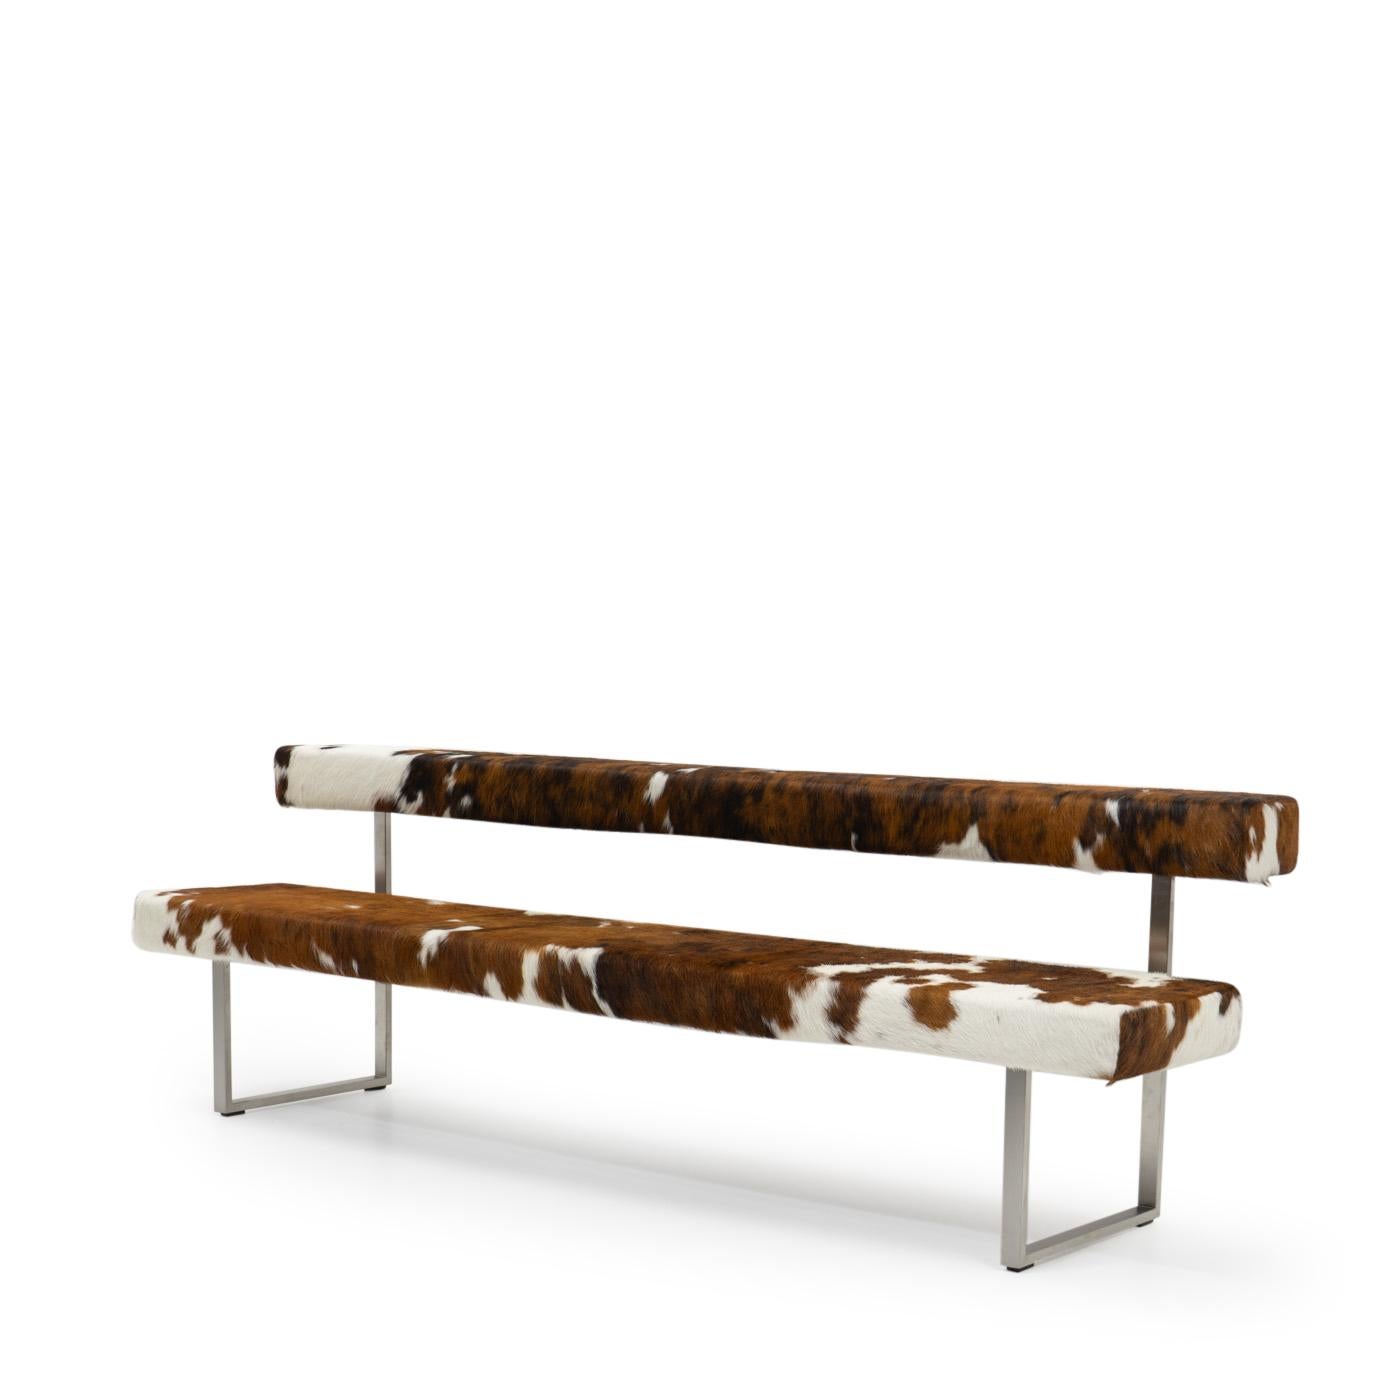 Permesso, conceived by designers Kurt Müller and Daniel Leist, offers a contemporary take on the conventional bench. 

Its allure lies in its formal simplicity and lightness, reimagining the traditional arrangement with two floating cubes. The seat